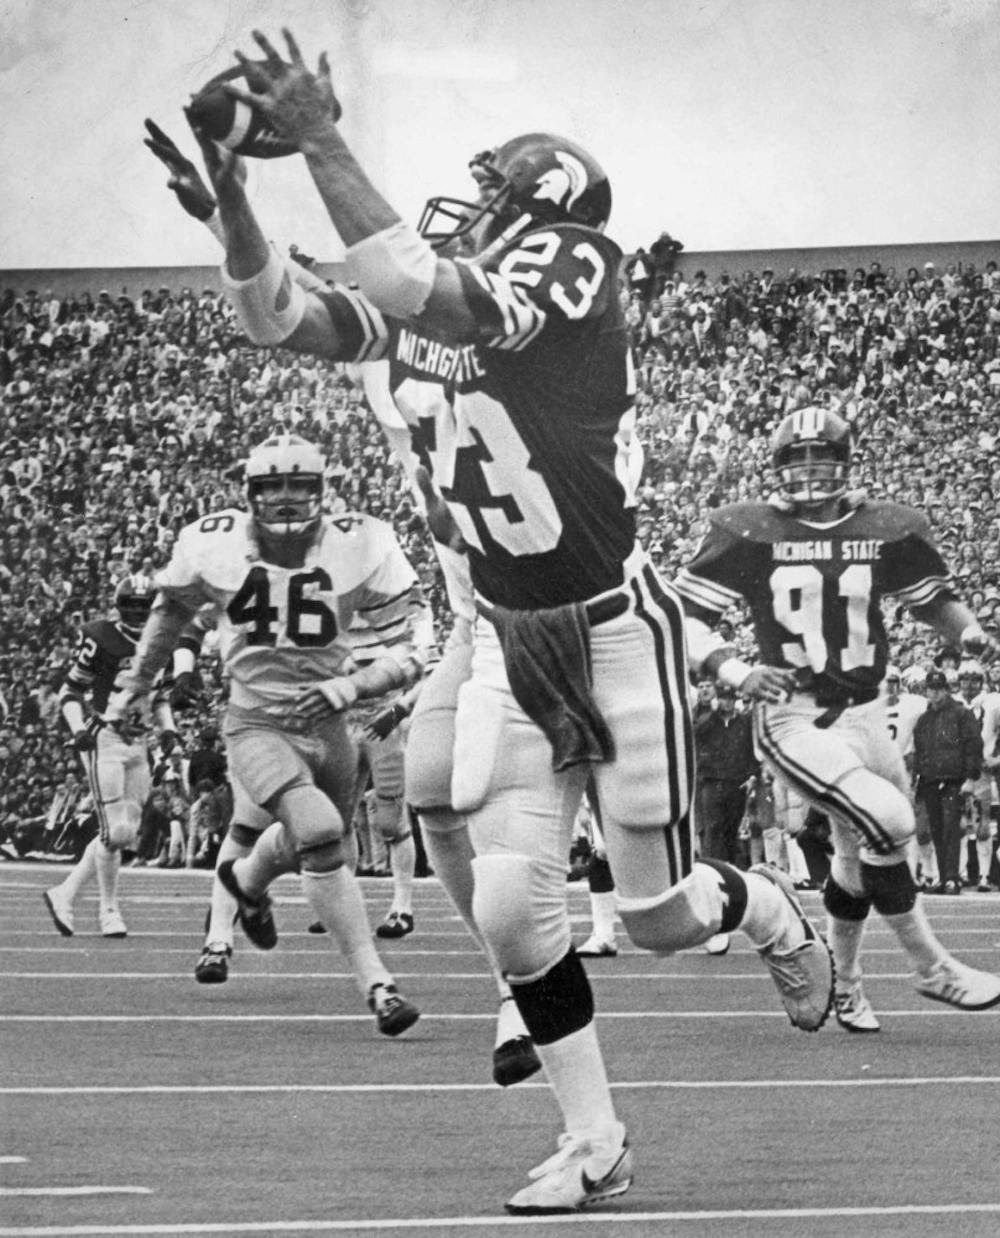 <p>Former MSU wide receiver Kirk Gibson was inducted into the College Football Hall of Fame. Photo courtesy of MSU Athletic Communications.</p>